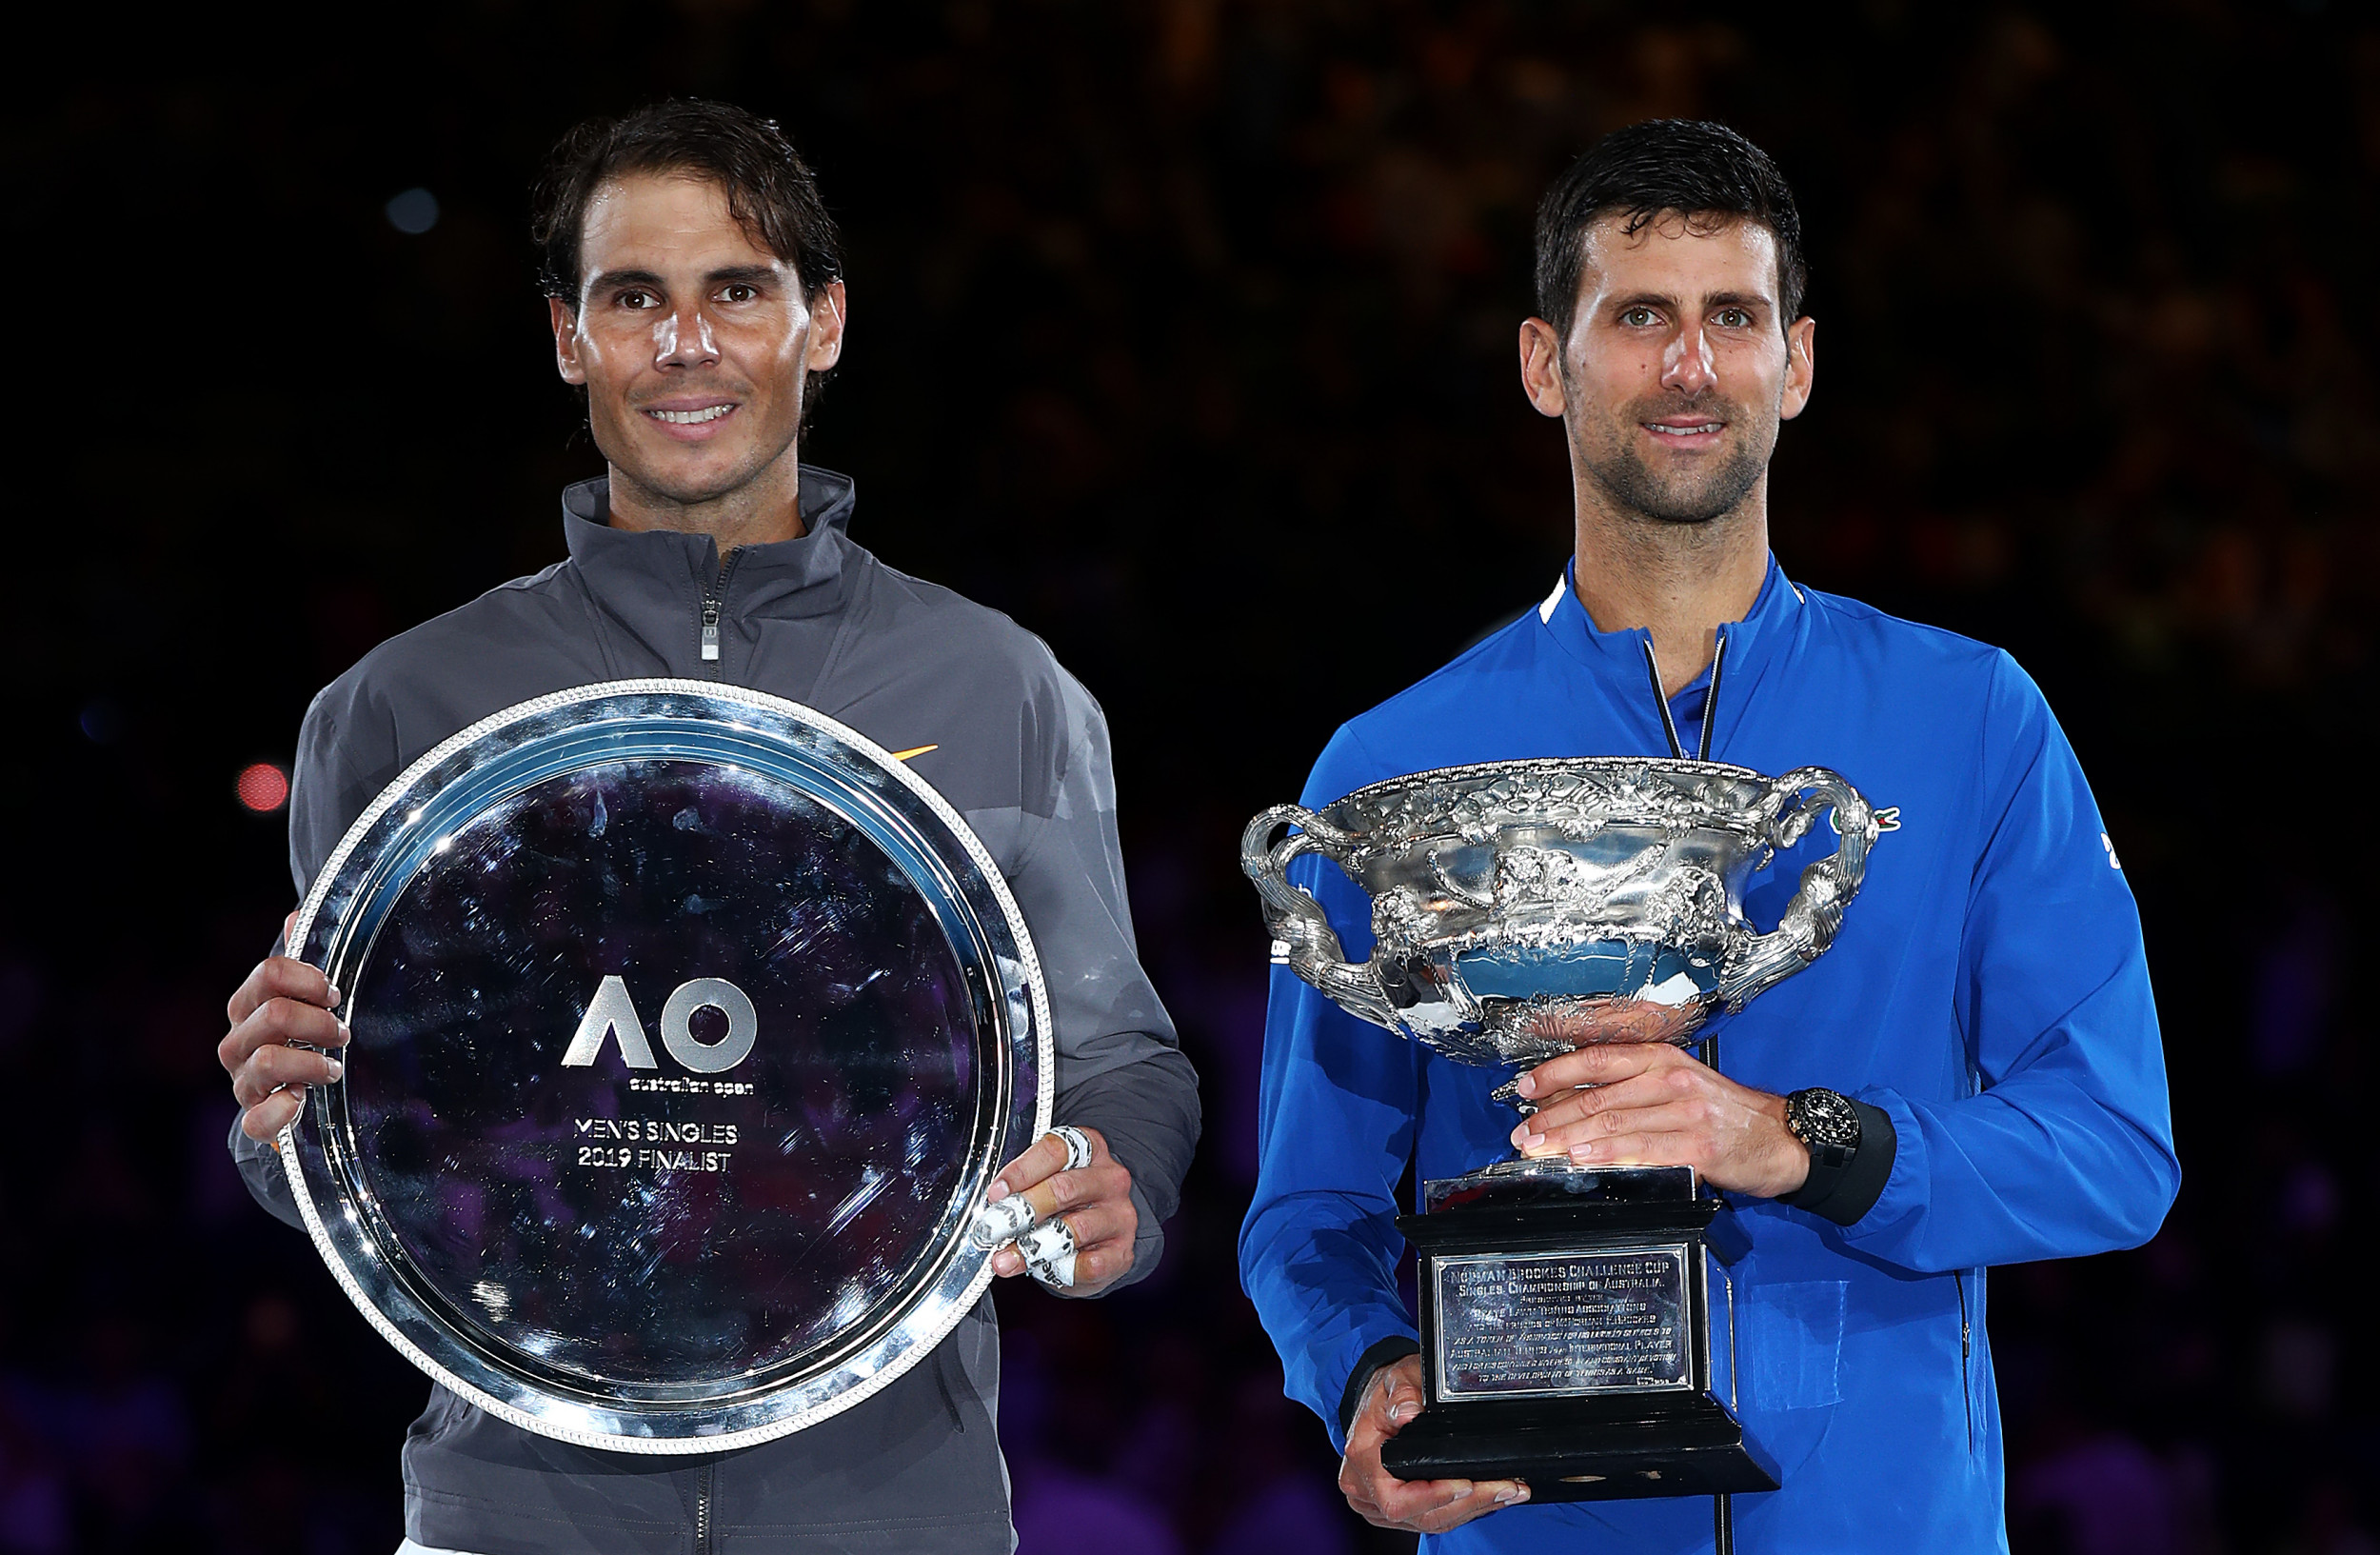 Australian Open 2020 Odds: Who Is the Favorite to Win Melbourne?